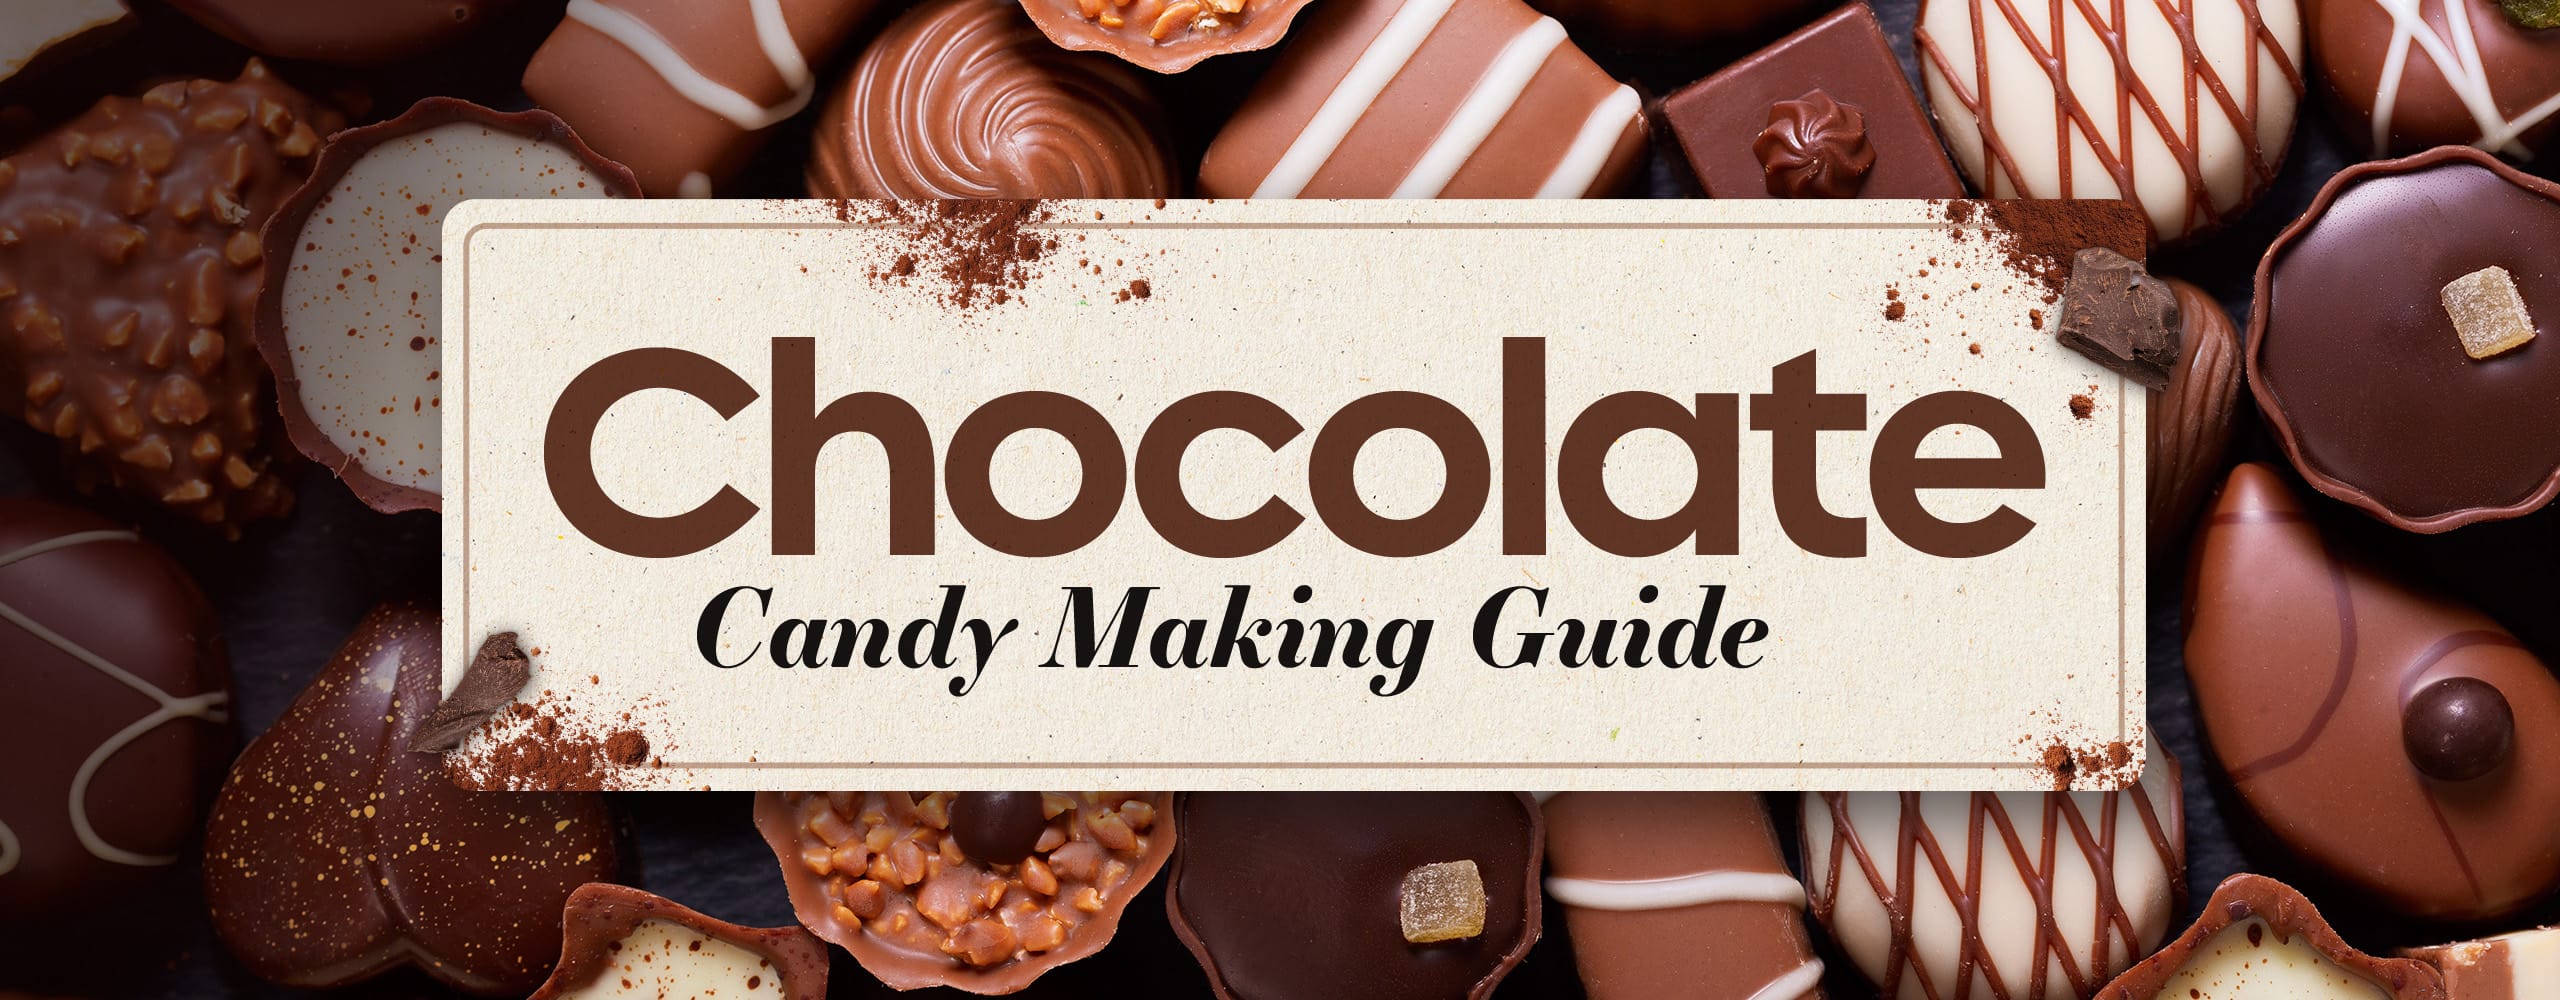 Candy Making Tips from a Real Chocolatier